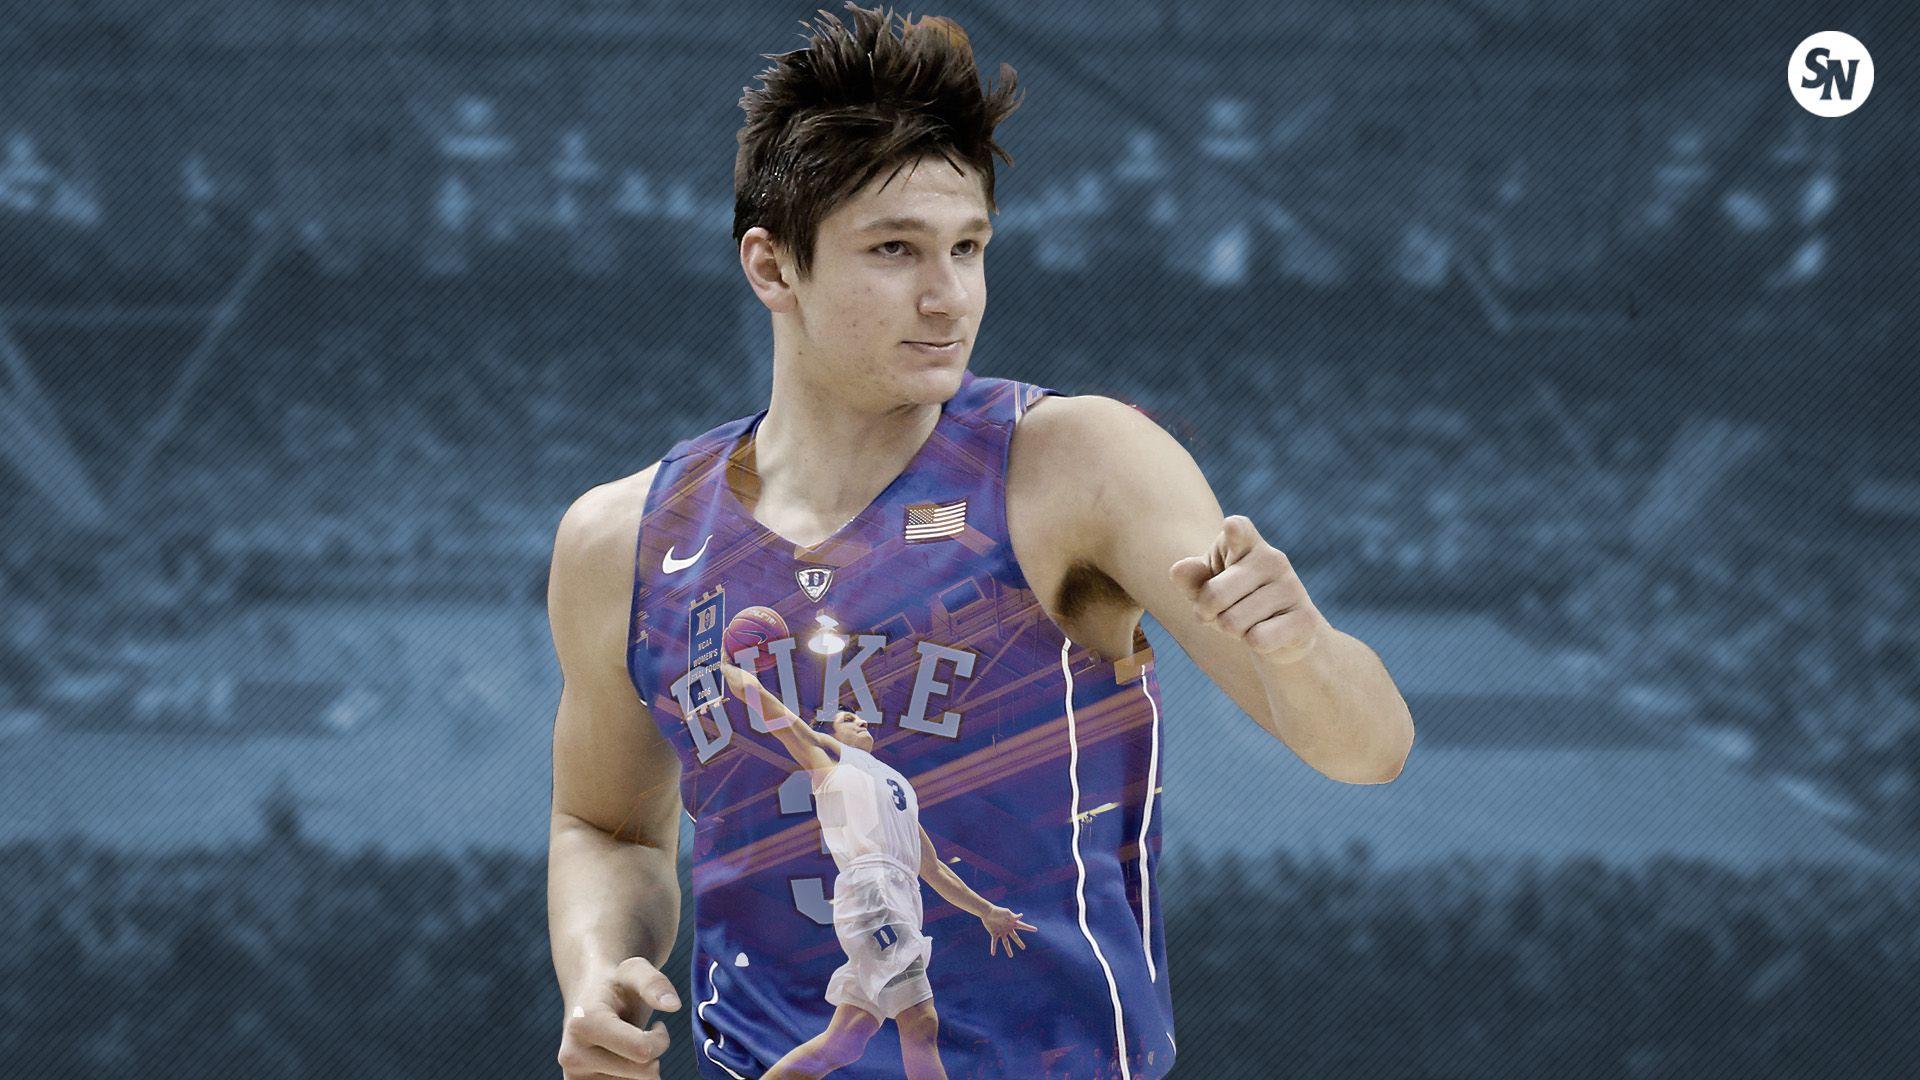 Duke's Grayson Allen is ready to dive into the hearts of college